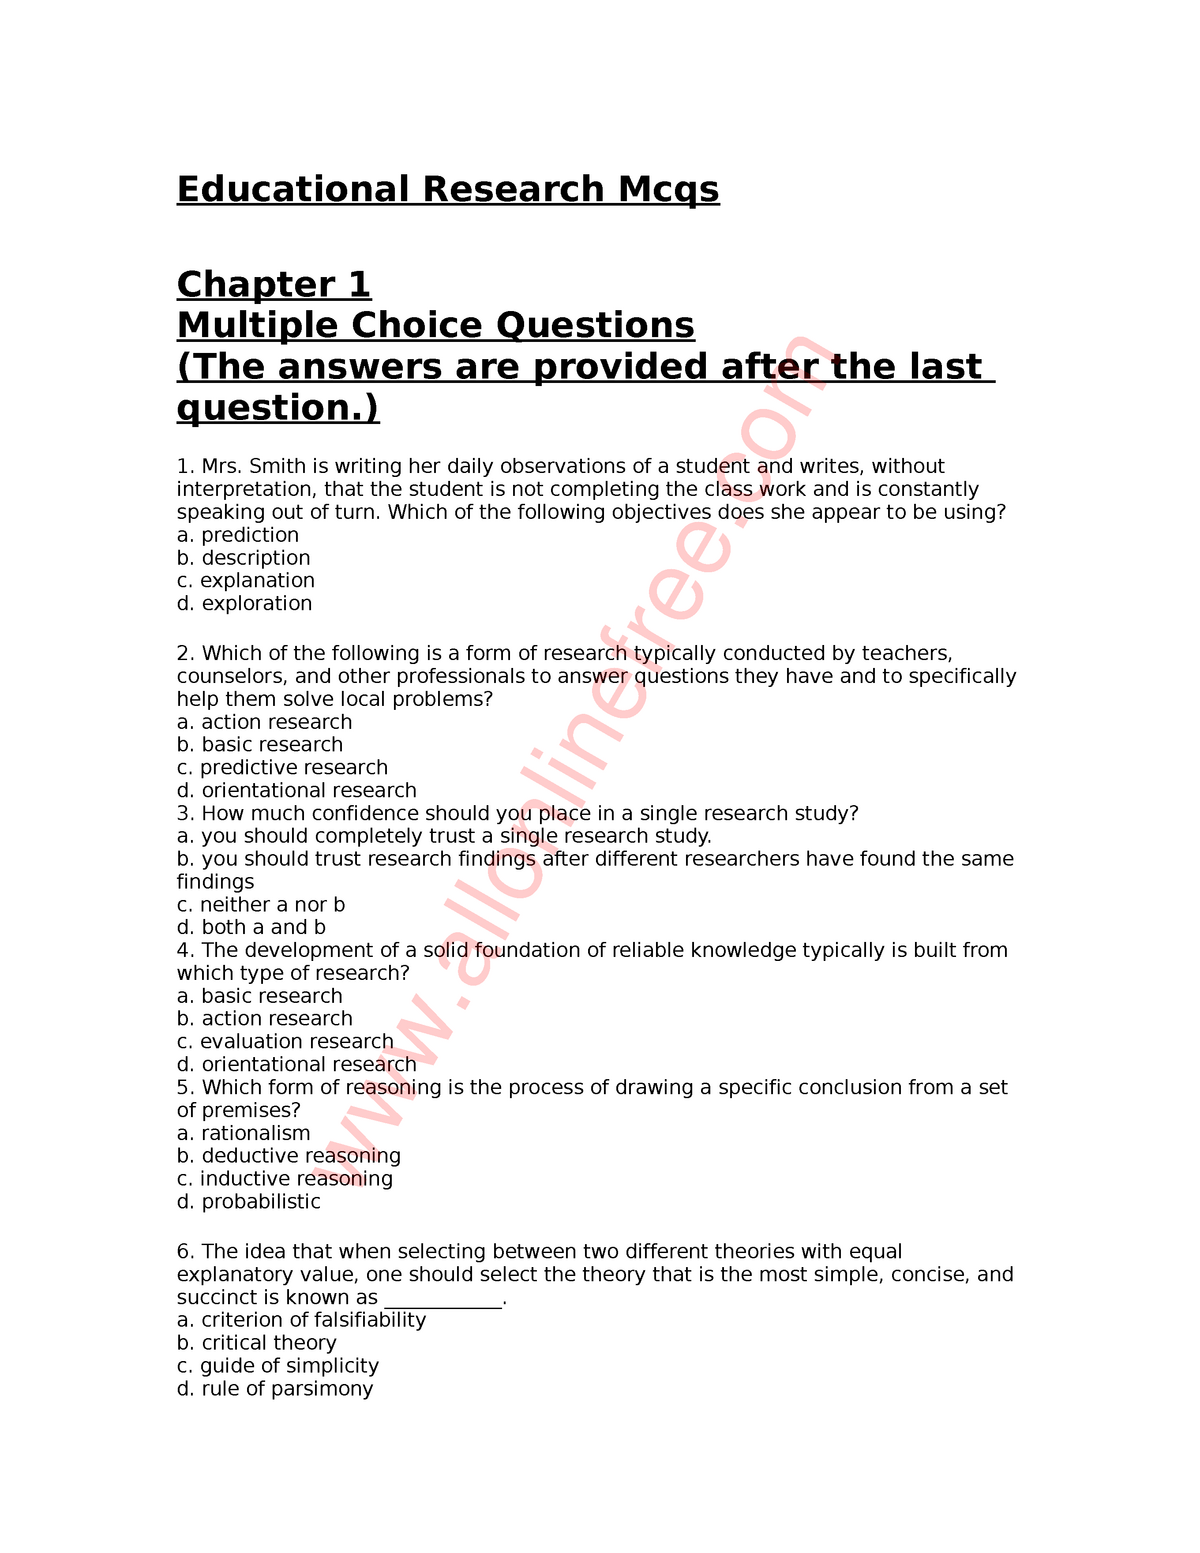 research hypothesis mcq